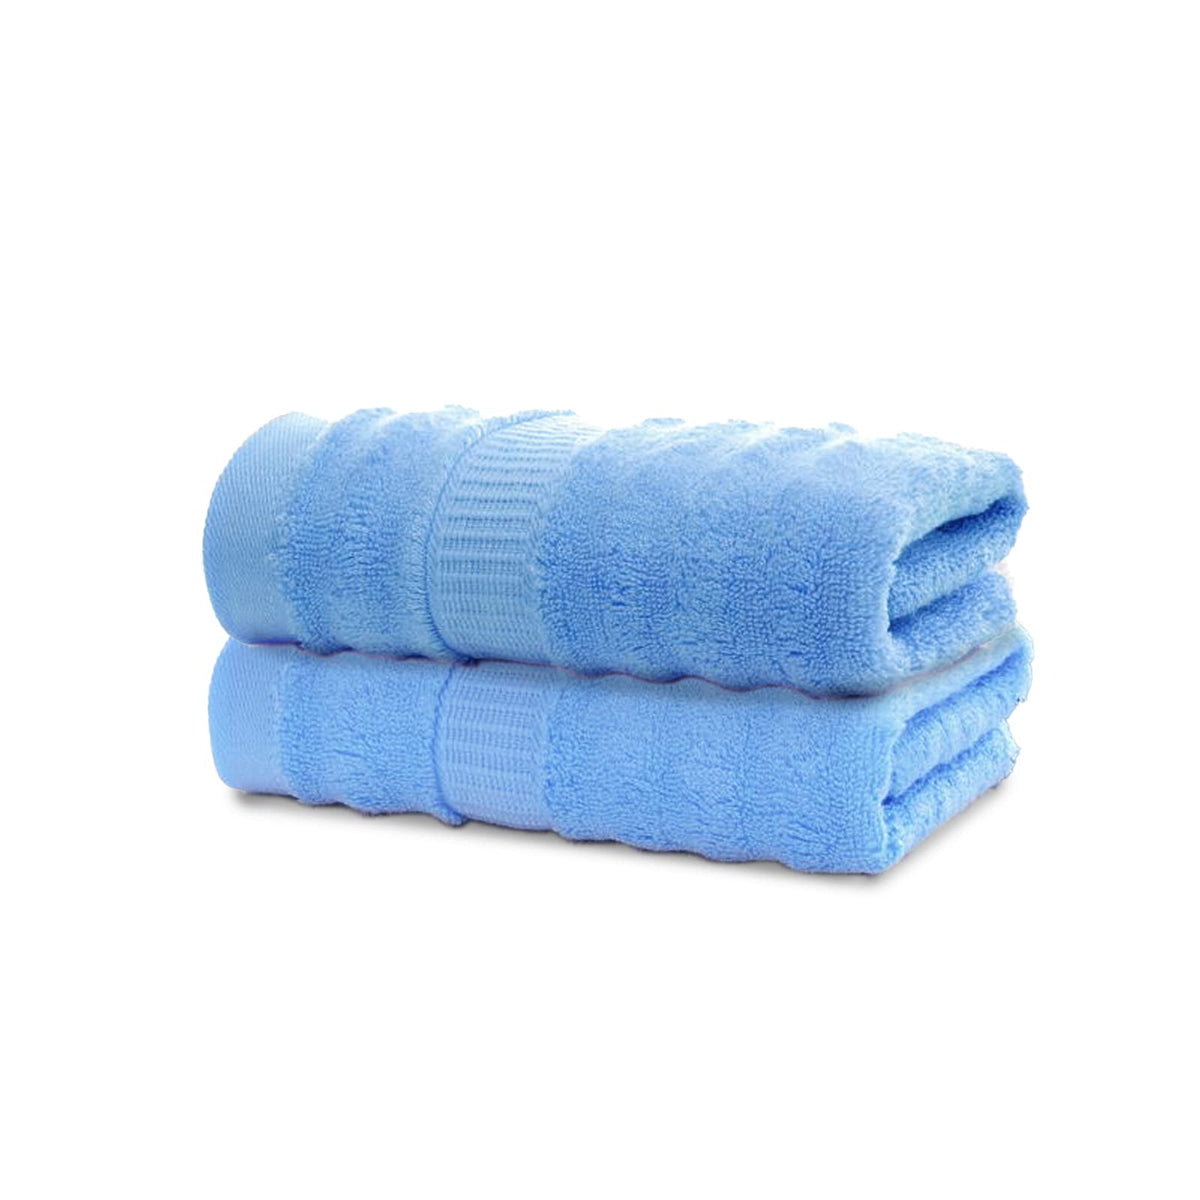 Mush Ultra Soft & Super Absorbent | 600 GSM Bamboo Bath Towel Set | 29 X 59 Inches (Sky-Blue) Pack of 2